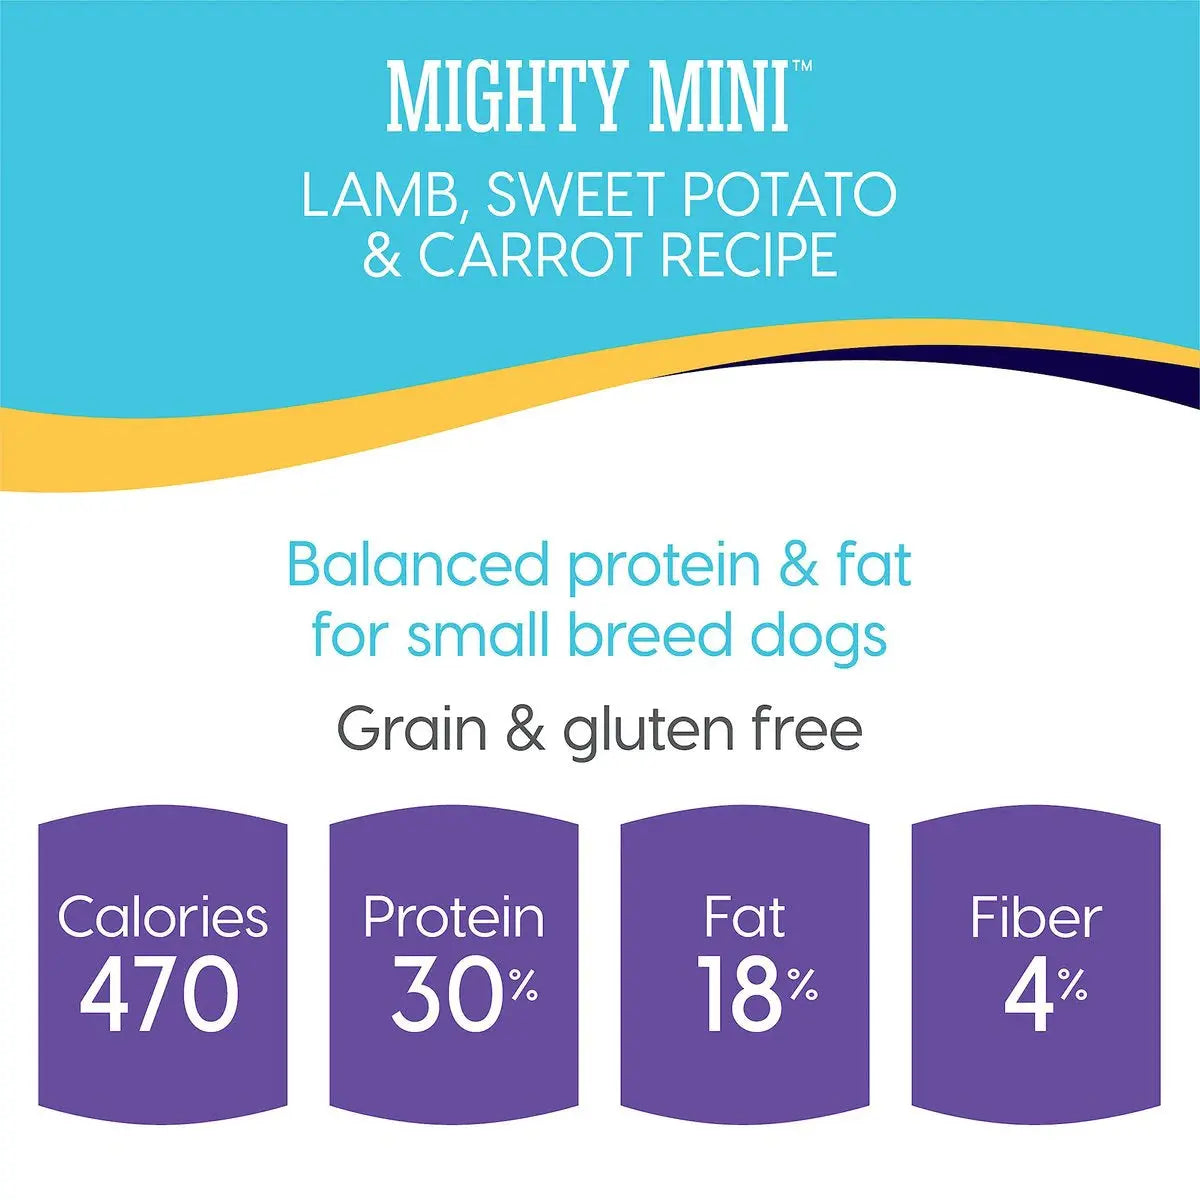 Solid Gold® Mighty Mini Grain Free Lamb, Sweet Potato & Cranberry Recipe Toy and Small Breed Dog Food Solid Gold